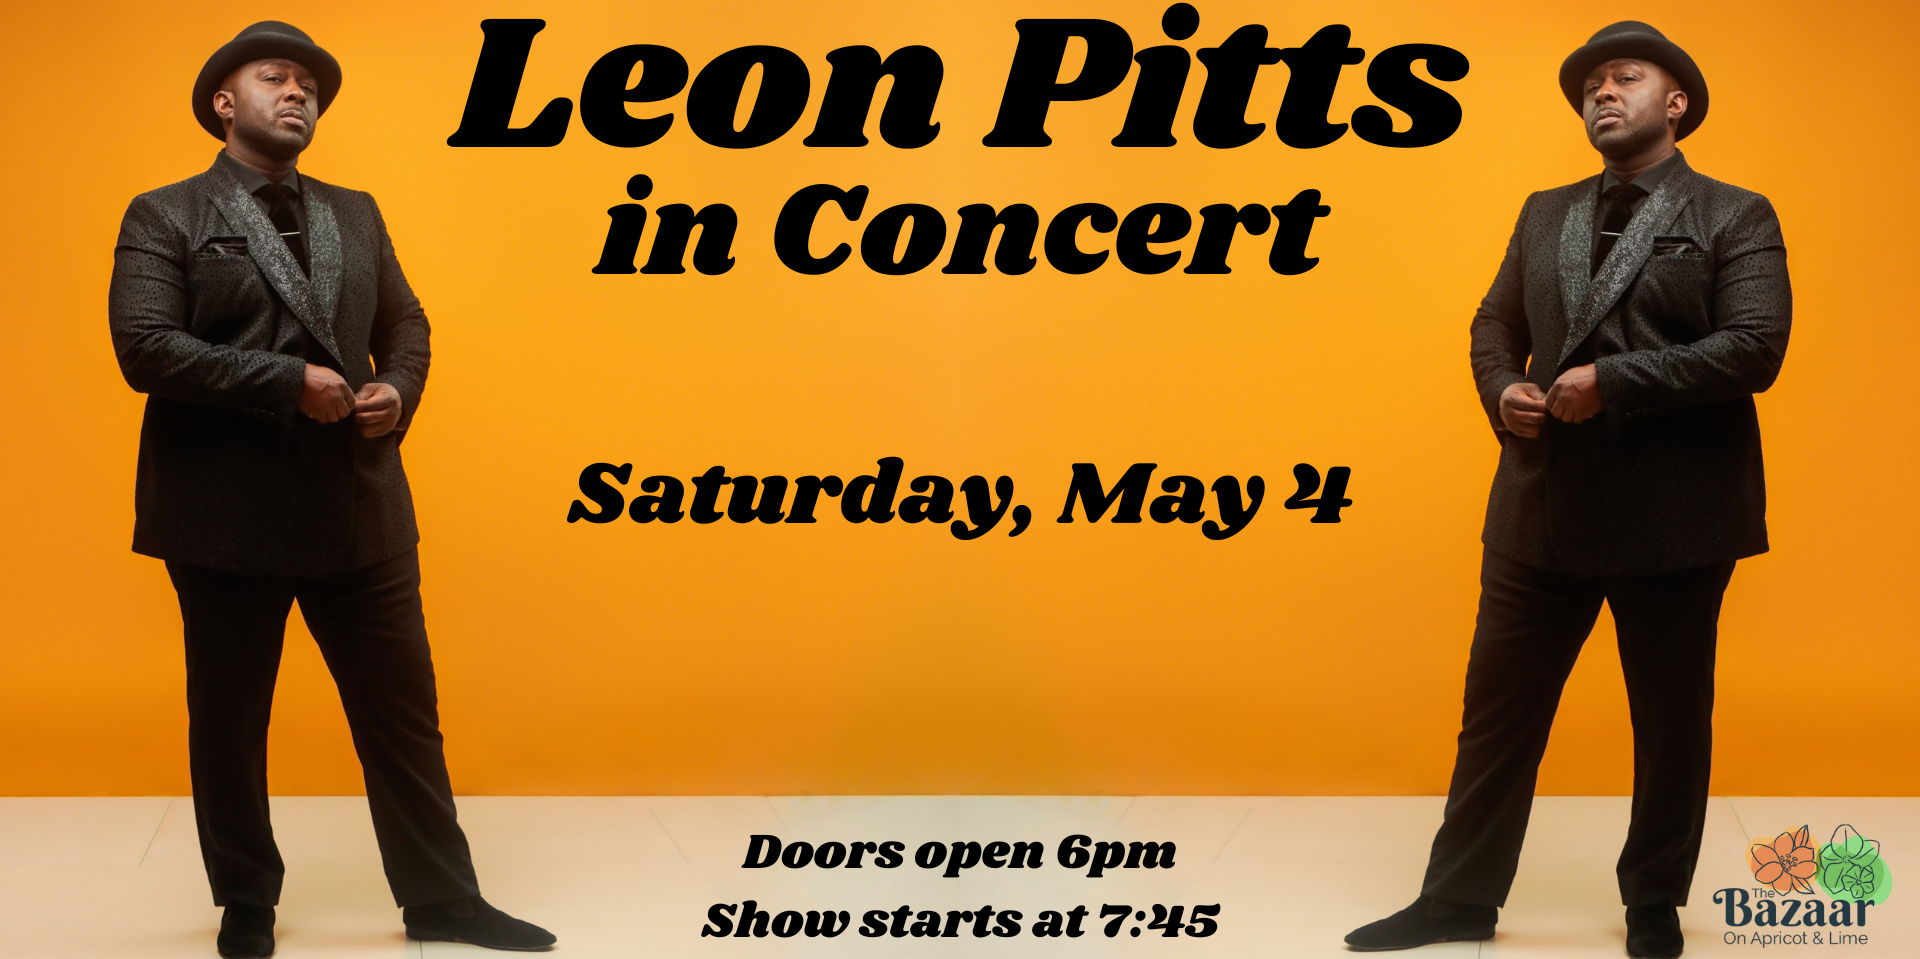 Leon Pitts in Concert promotional image